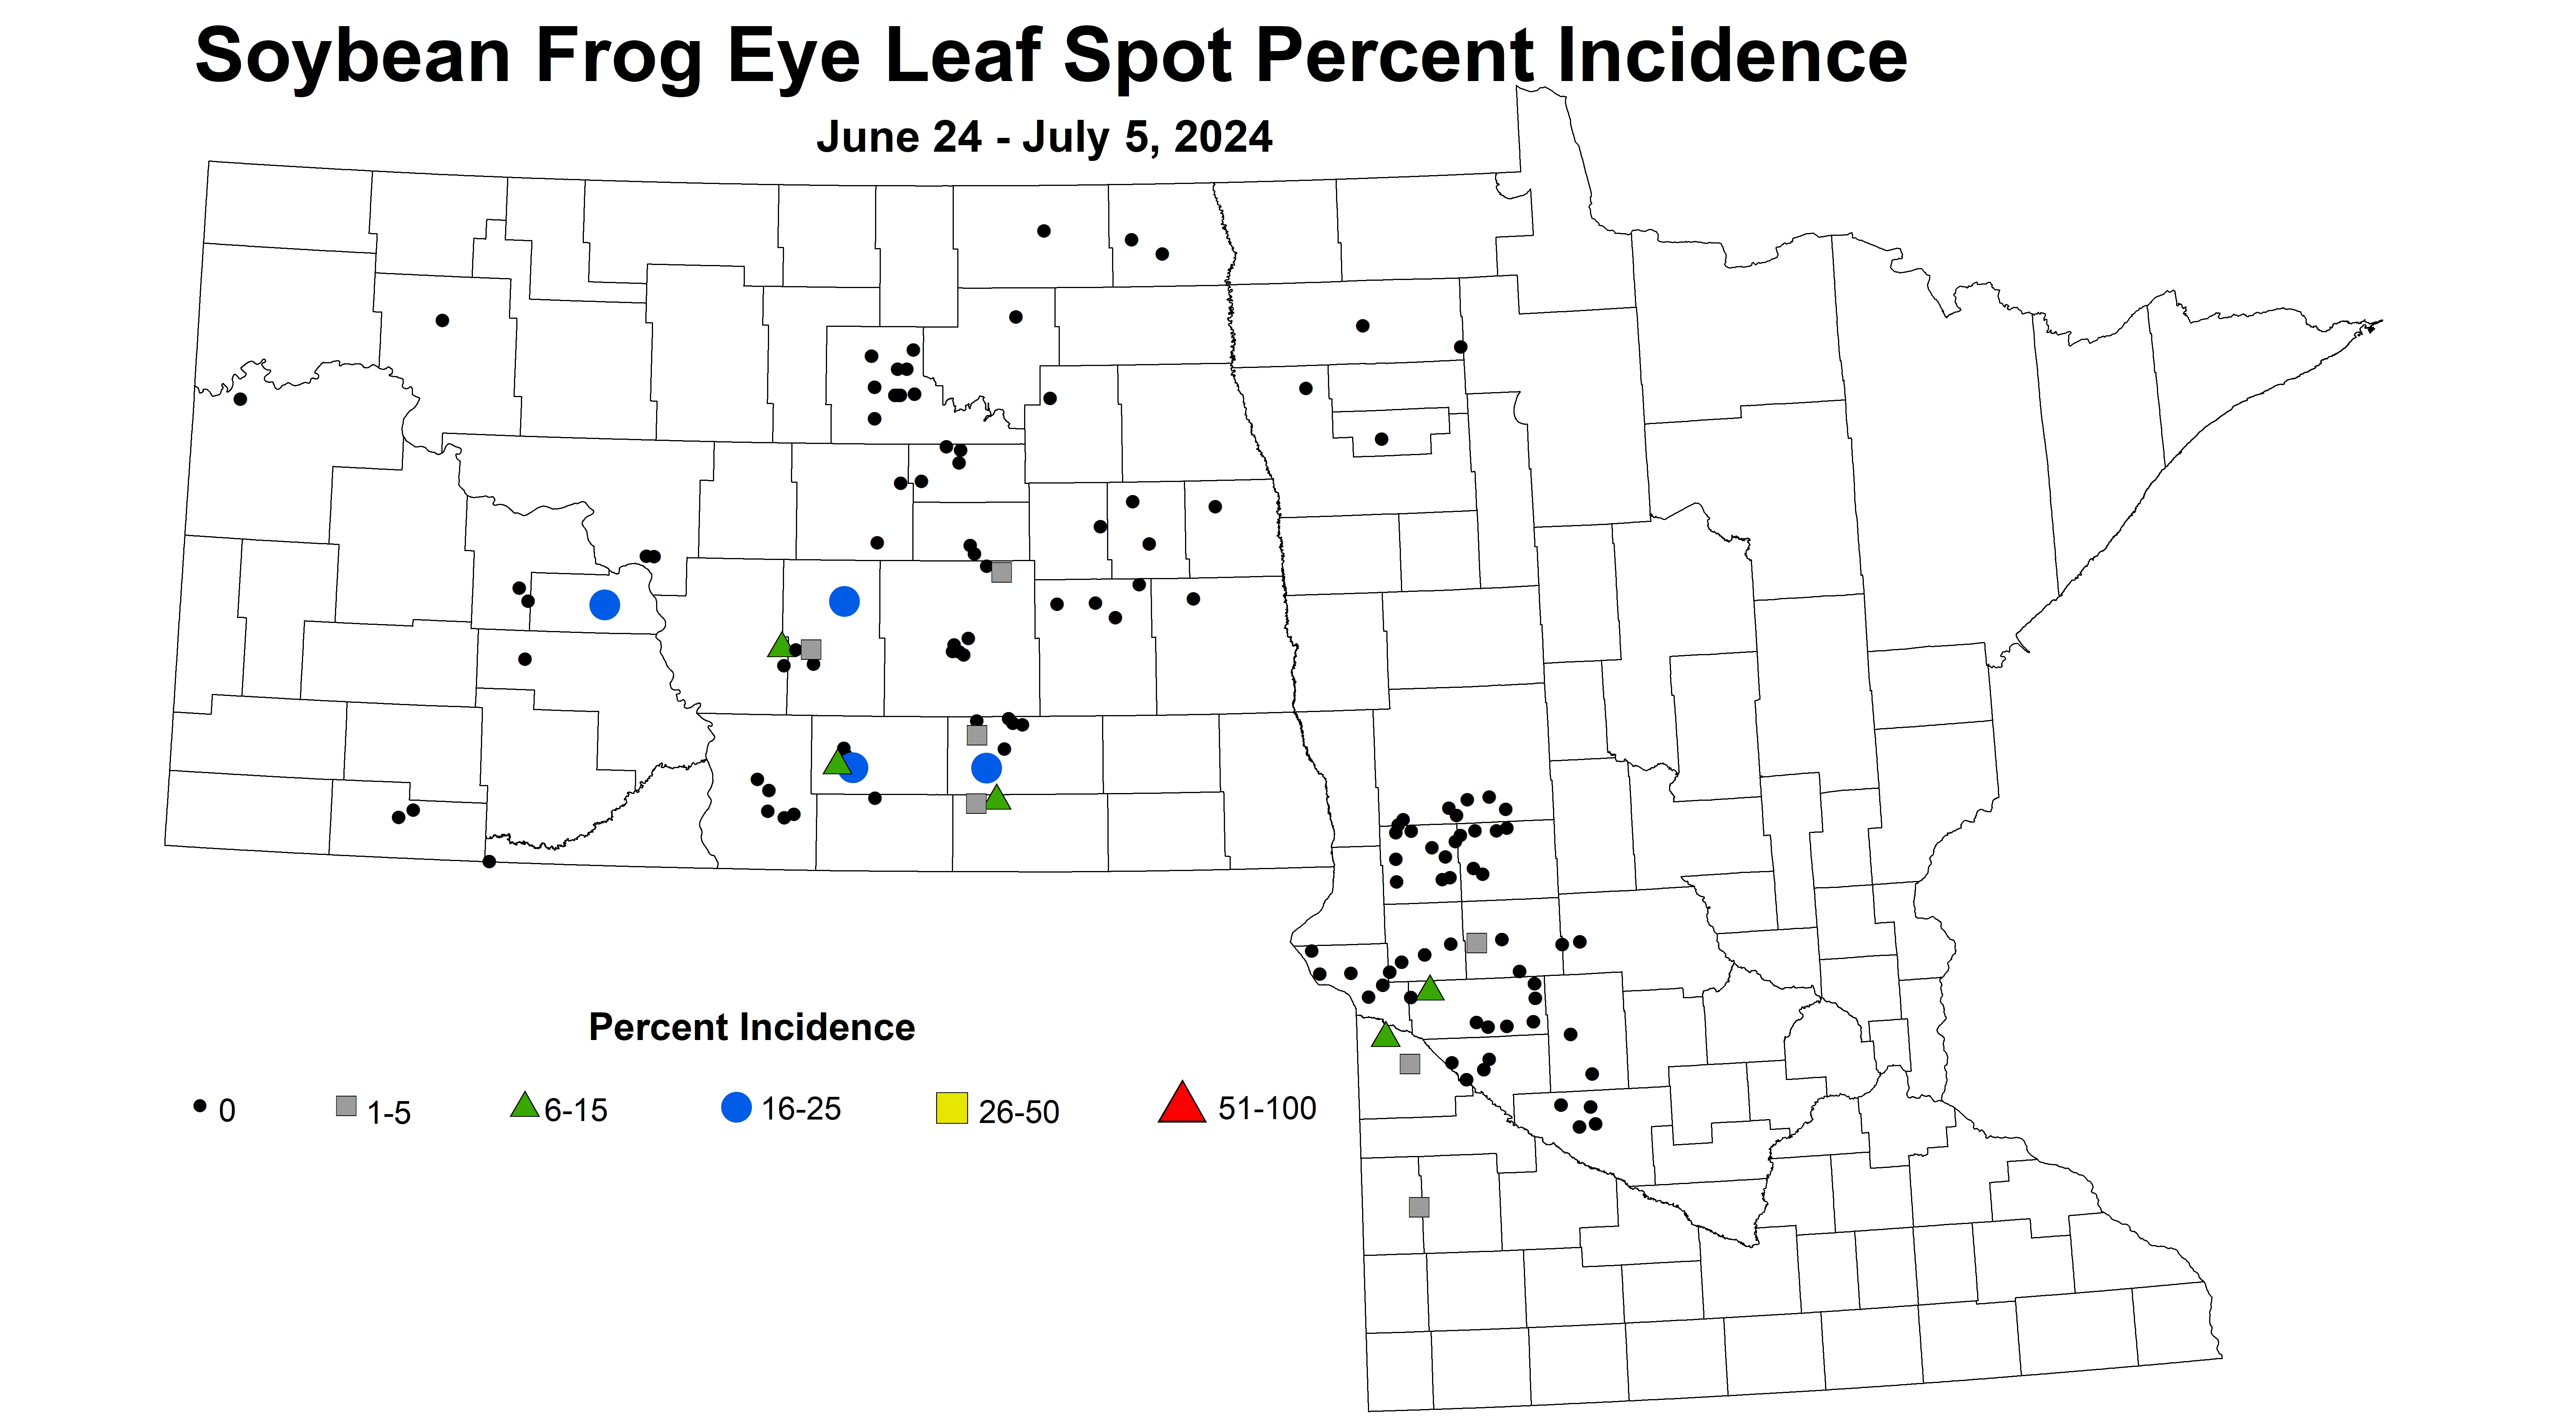 soybean frog eye leaf spot incidence June 24 to July 5 2024